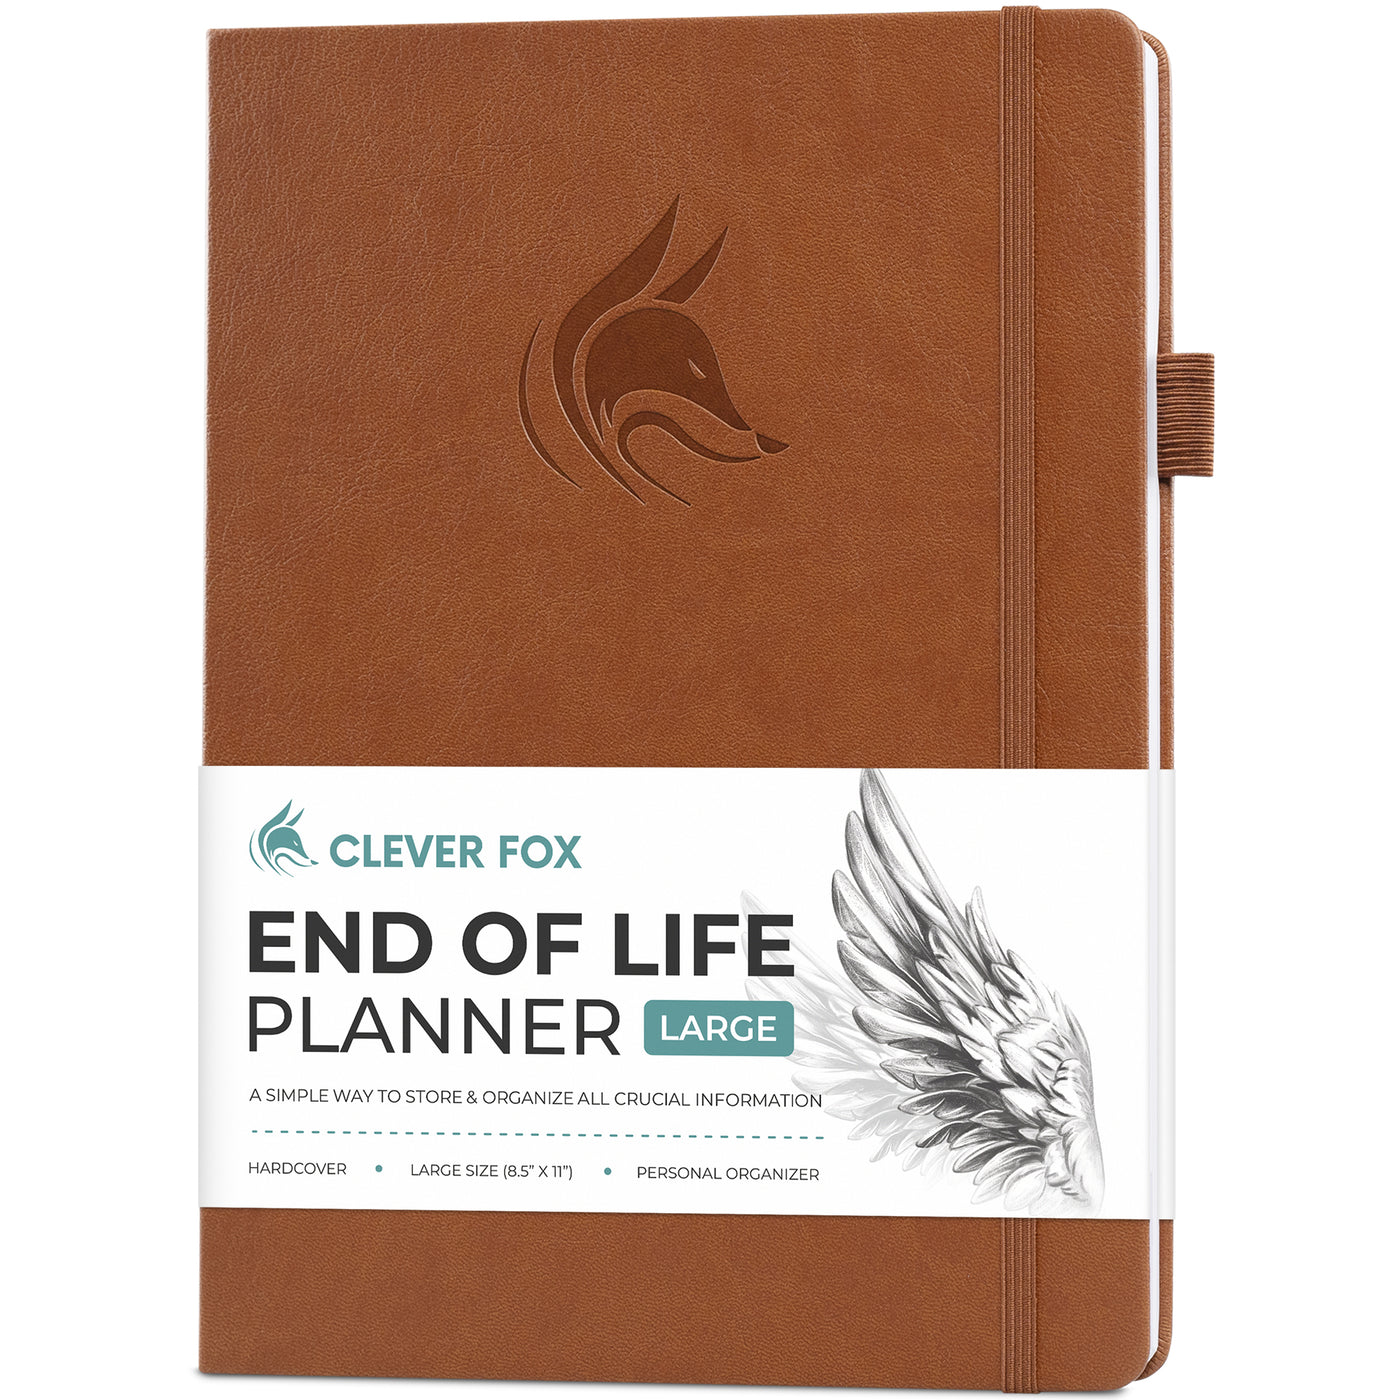 End of Life Planner A4